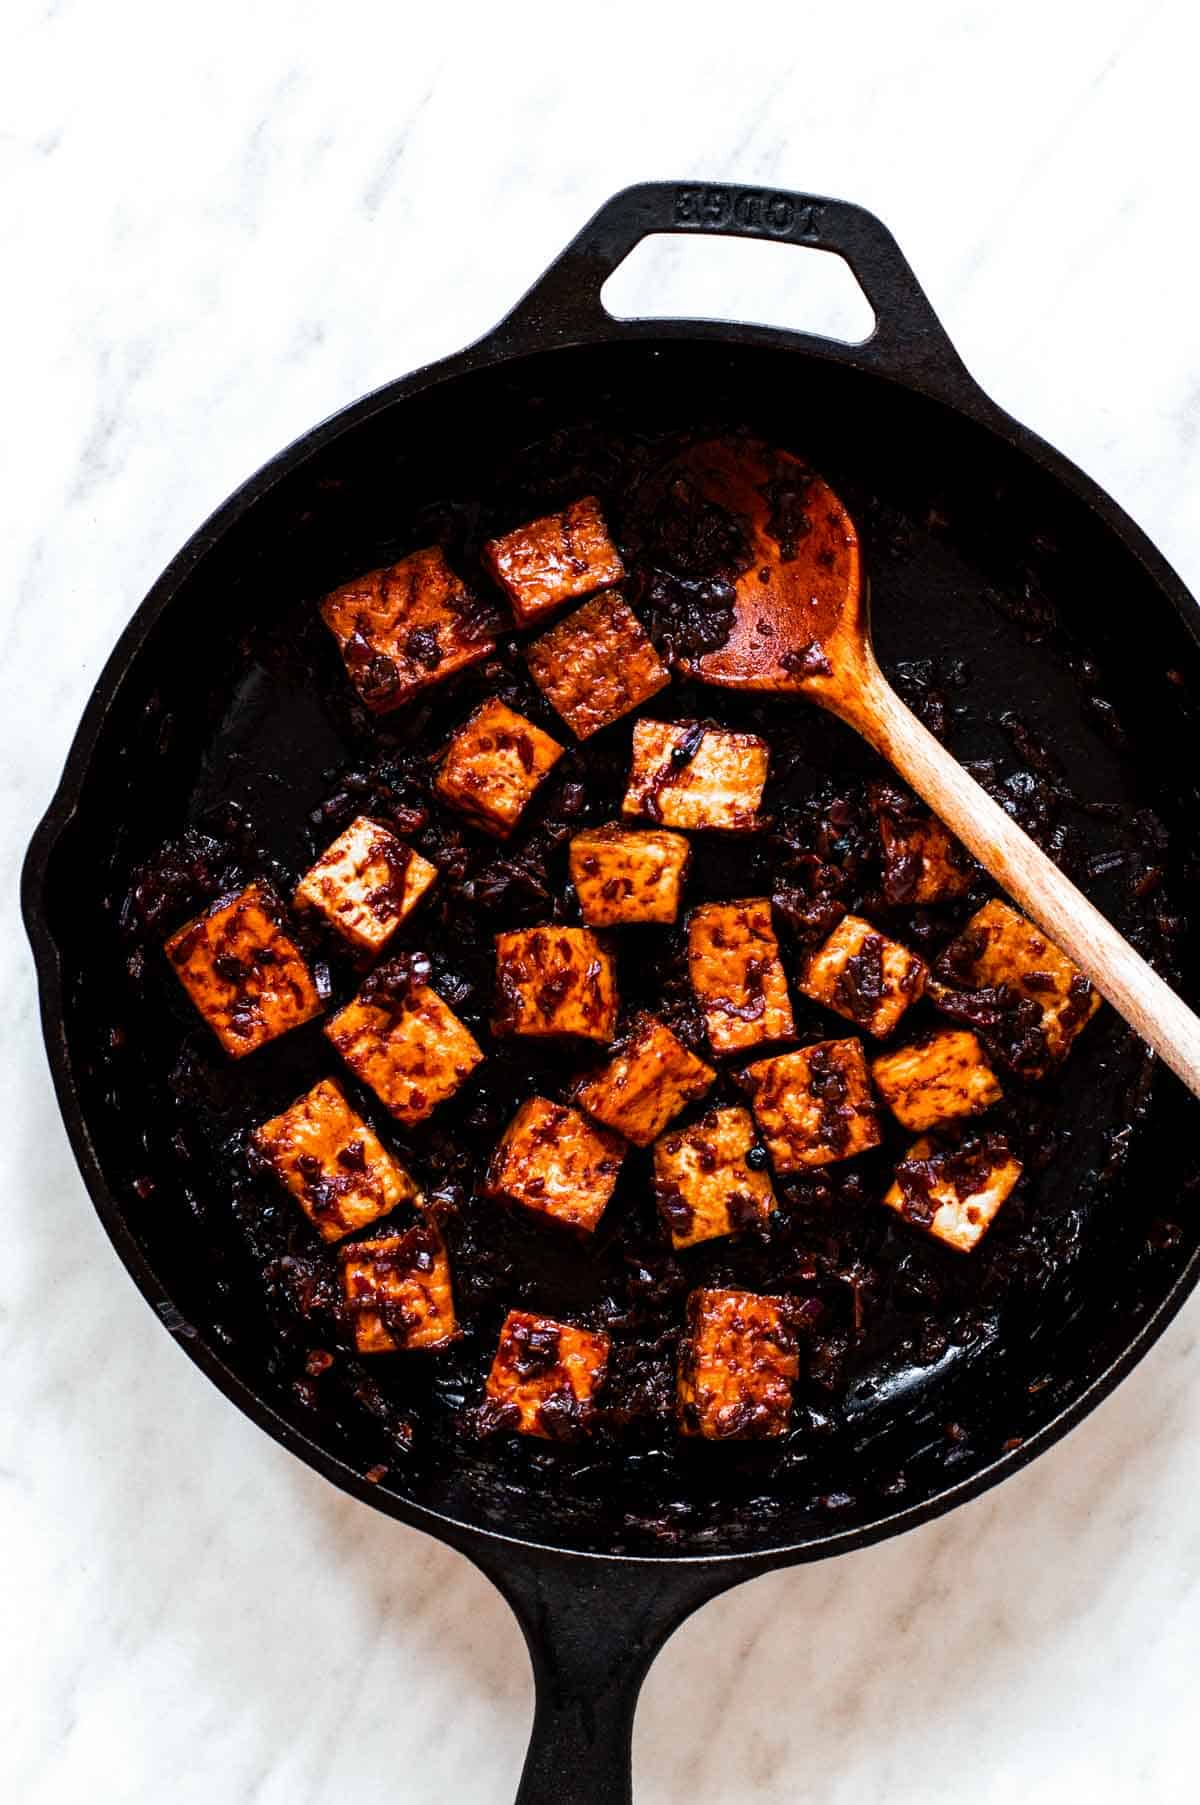 Cooking baked tofu cubes in adobo sauce in a cast-iron skillet.